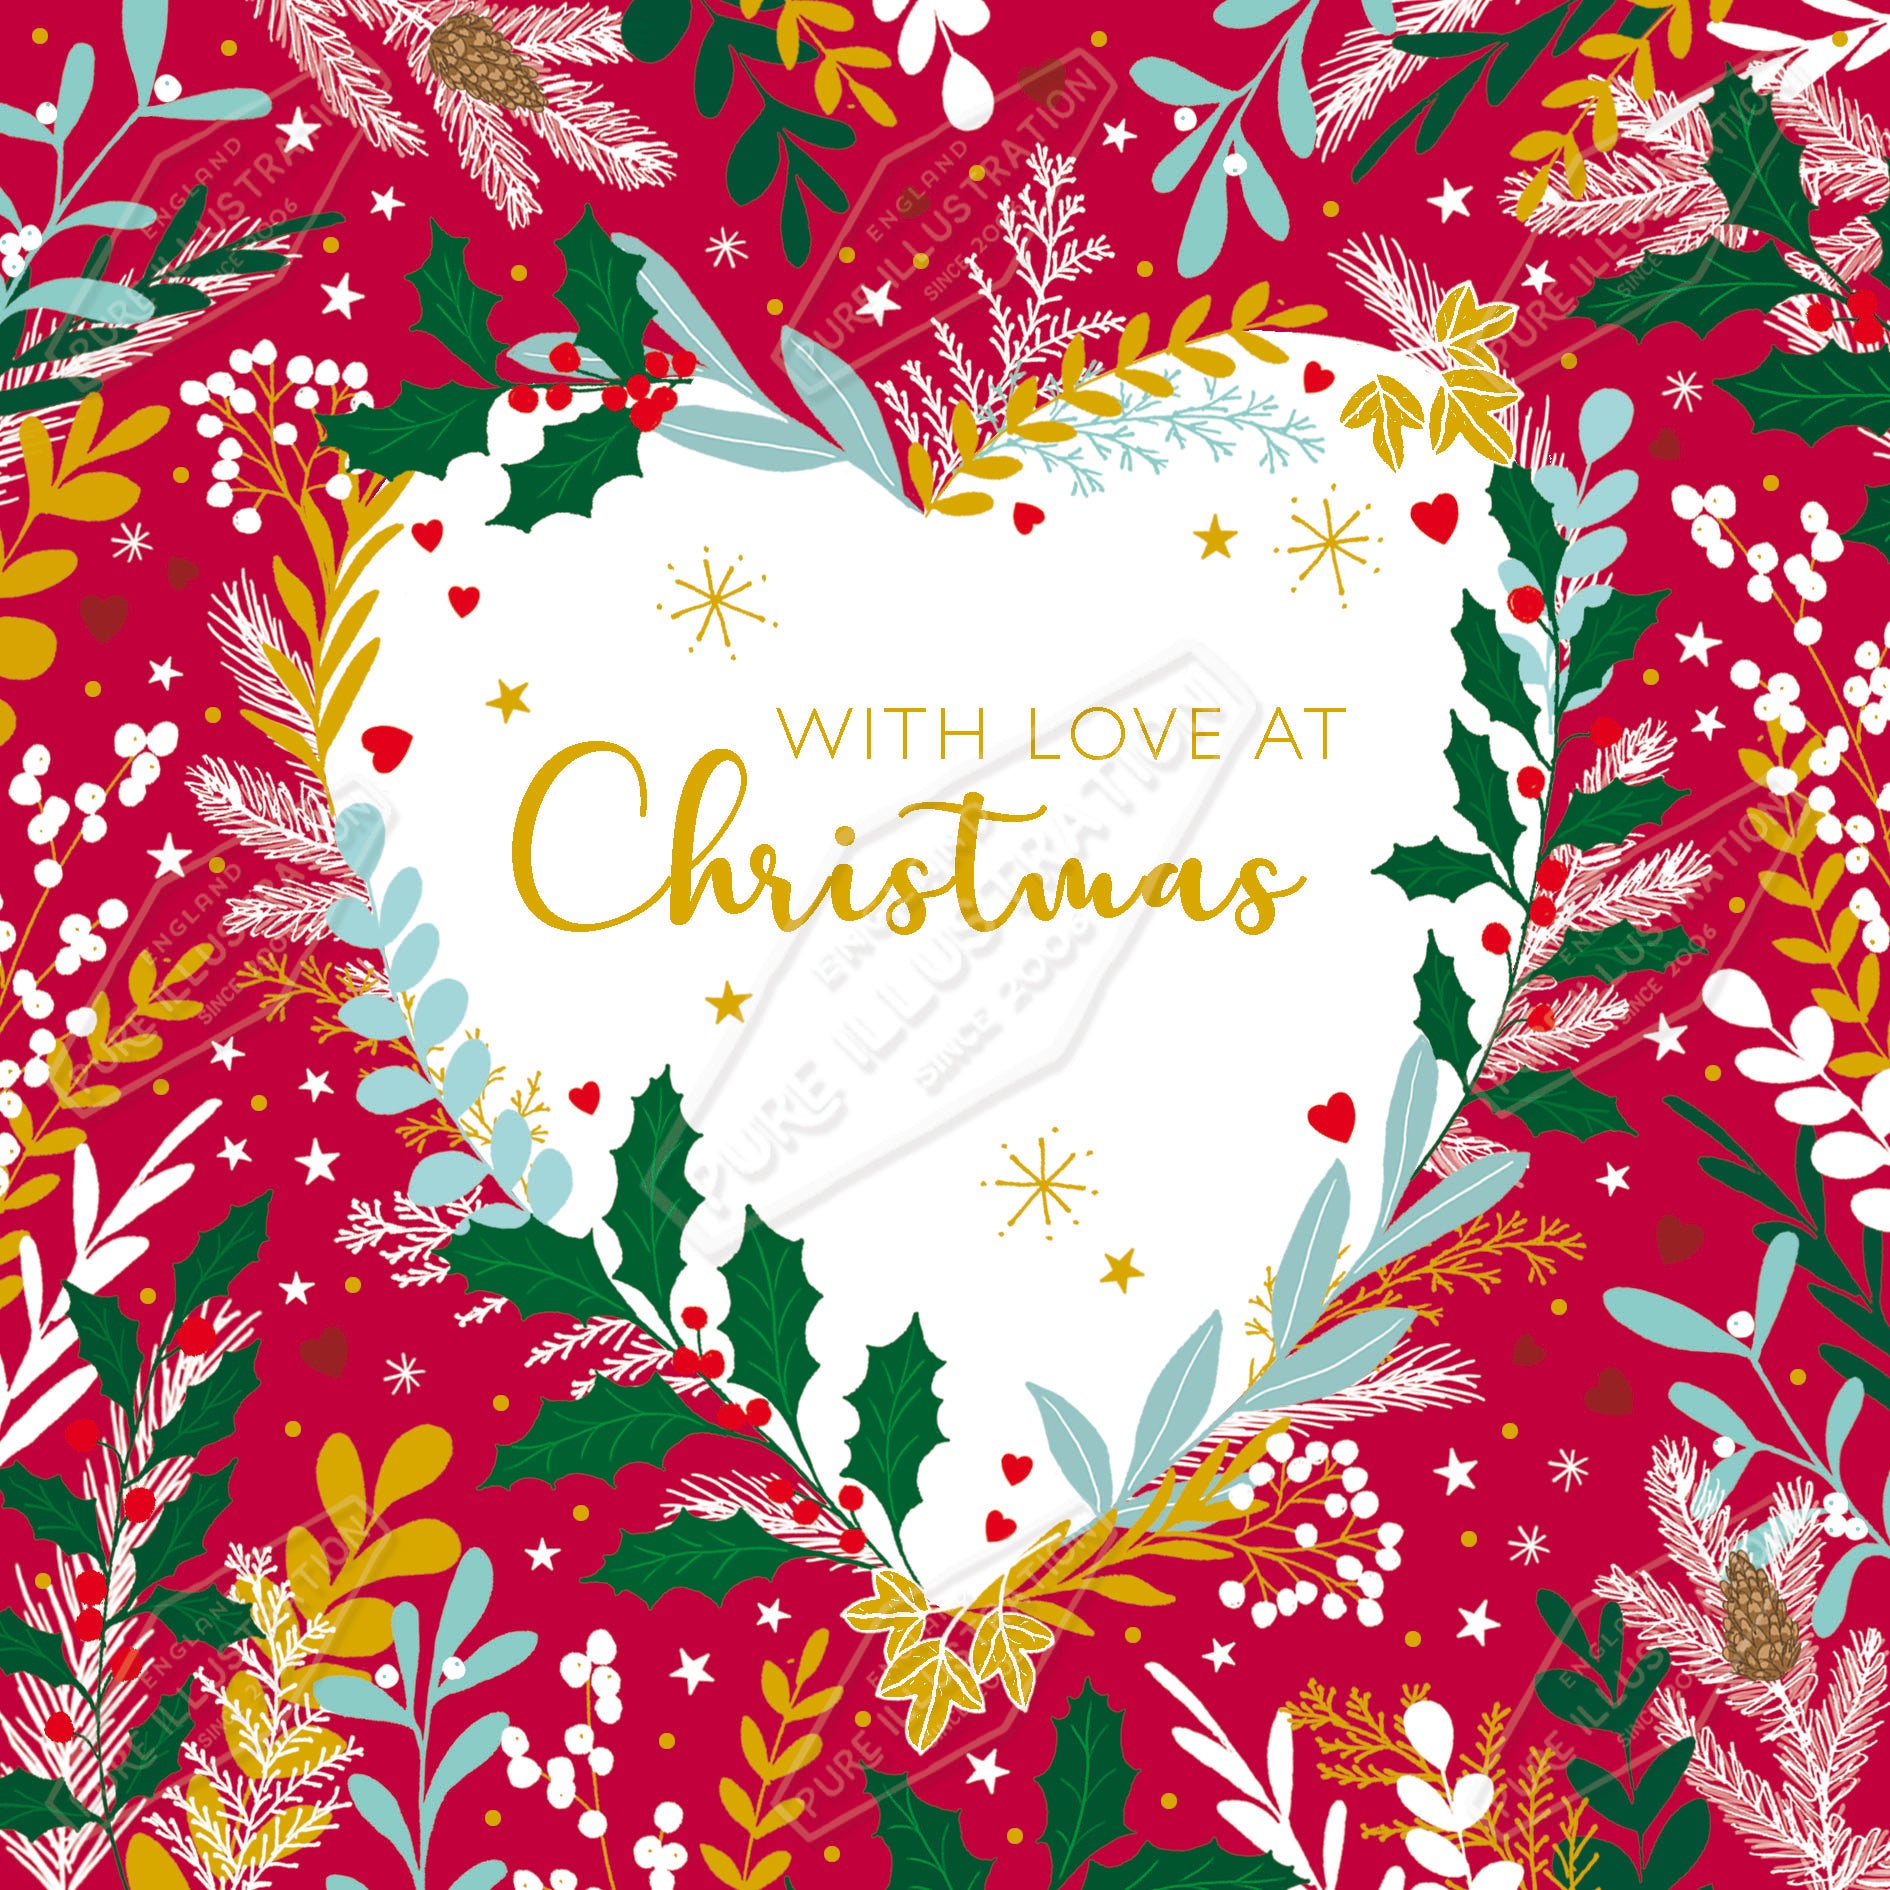 00035568CMI - Caitlin Miller is represented by Pure Art Licensing Agency - Christmas Greeting Card Design